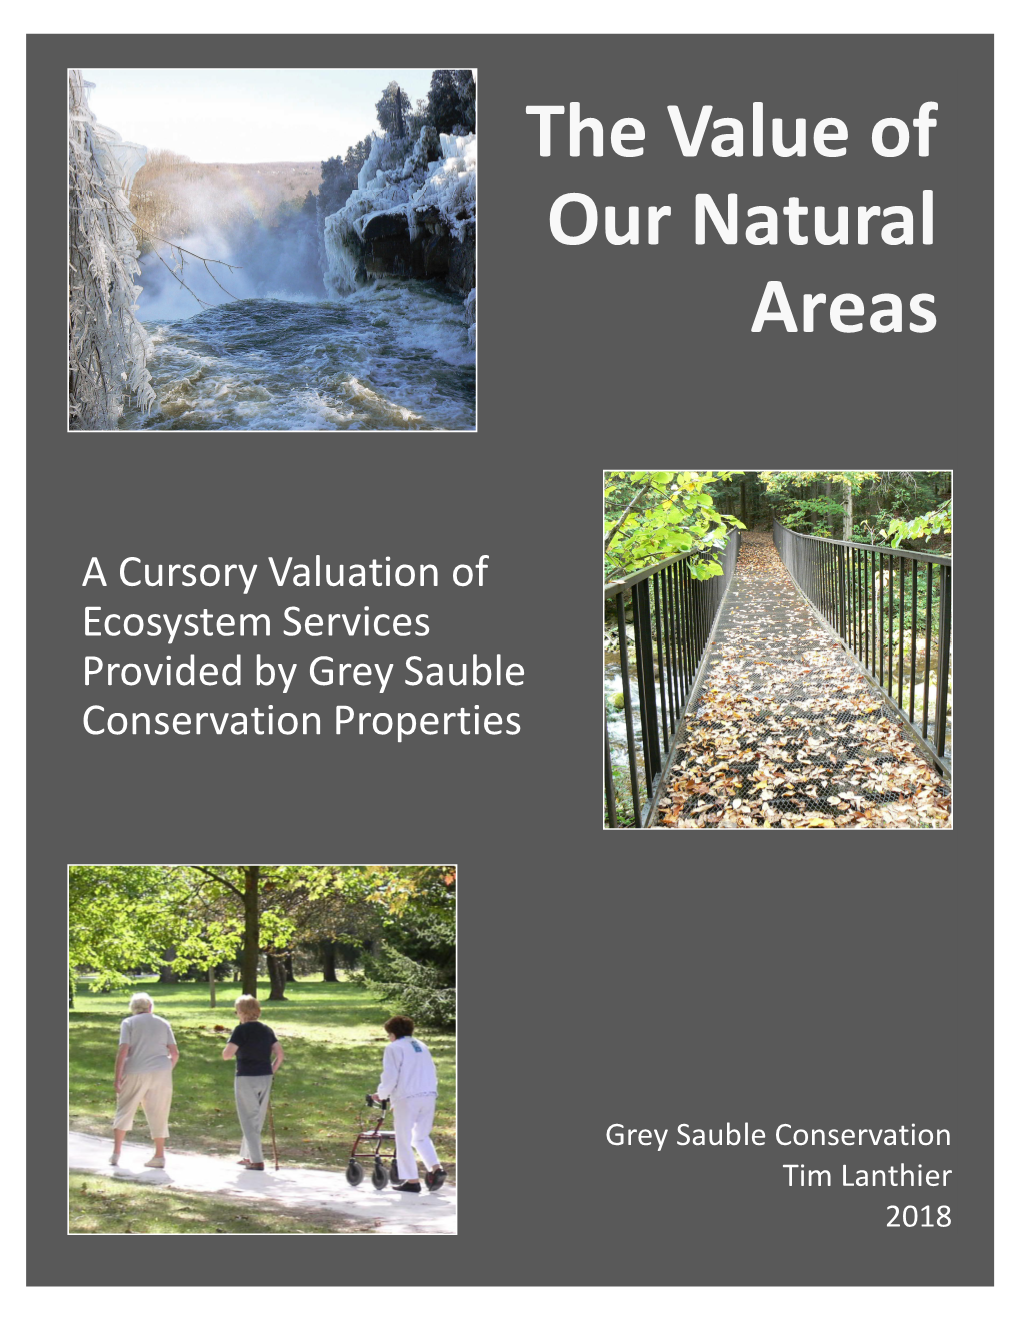 The Value of Our Natural Areas